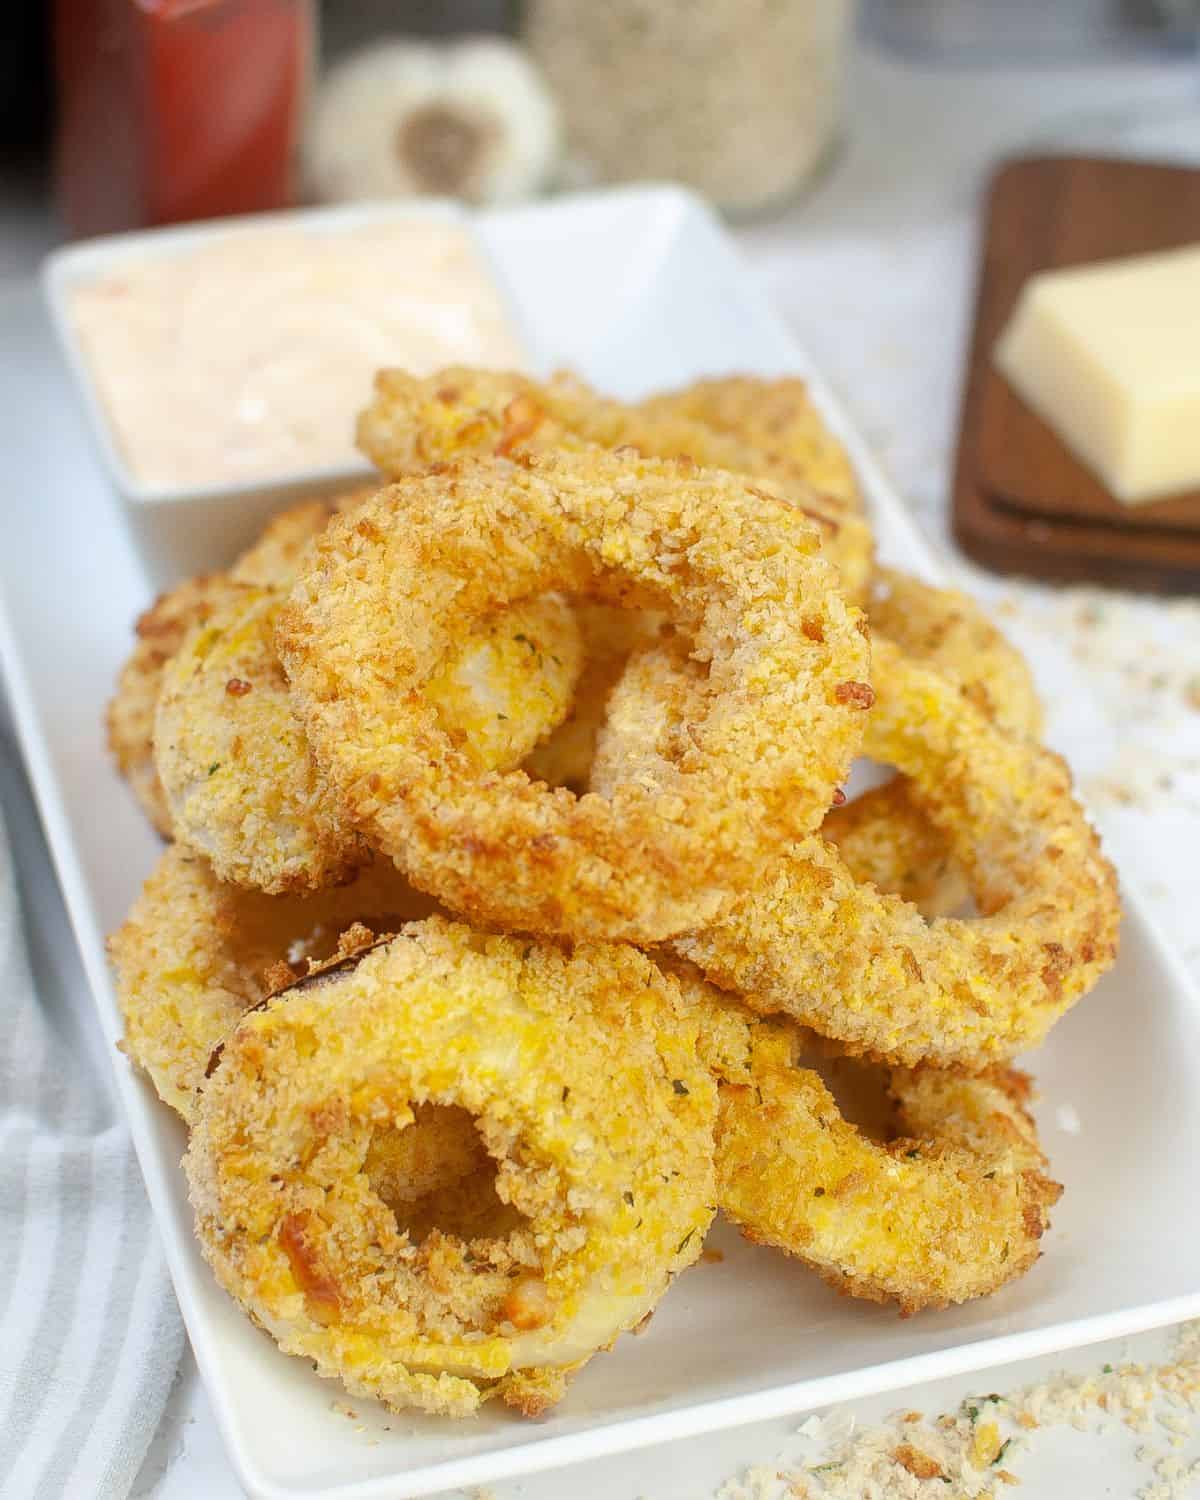 A plate of crispy onion rings made in the air fryer stuffed with cheese.